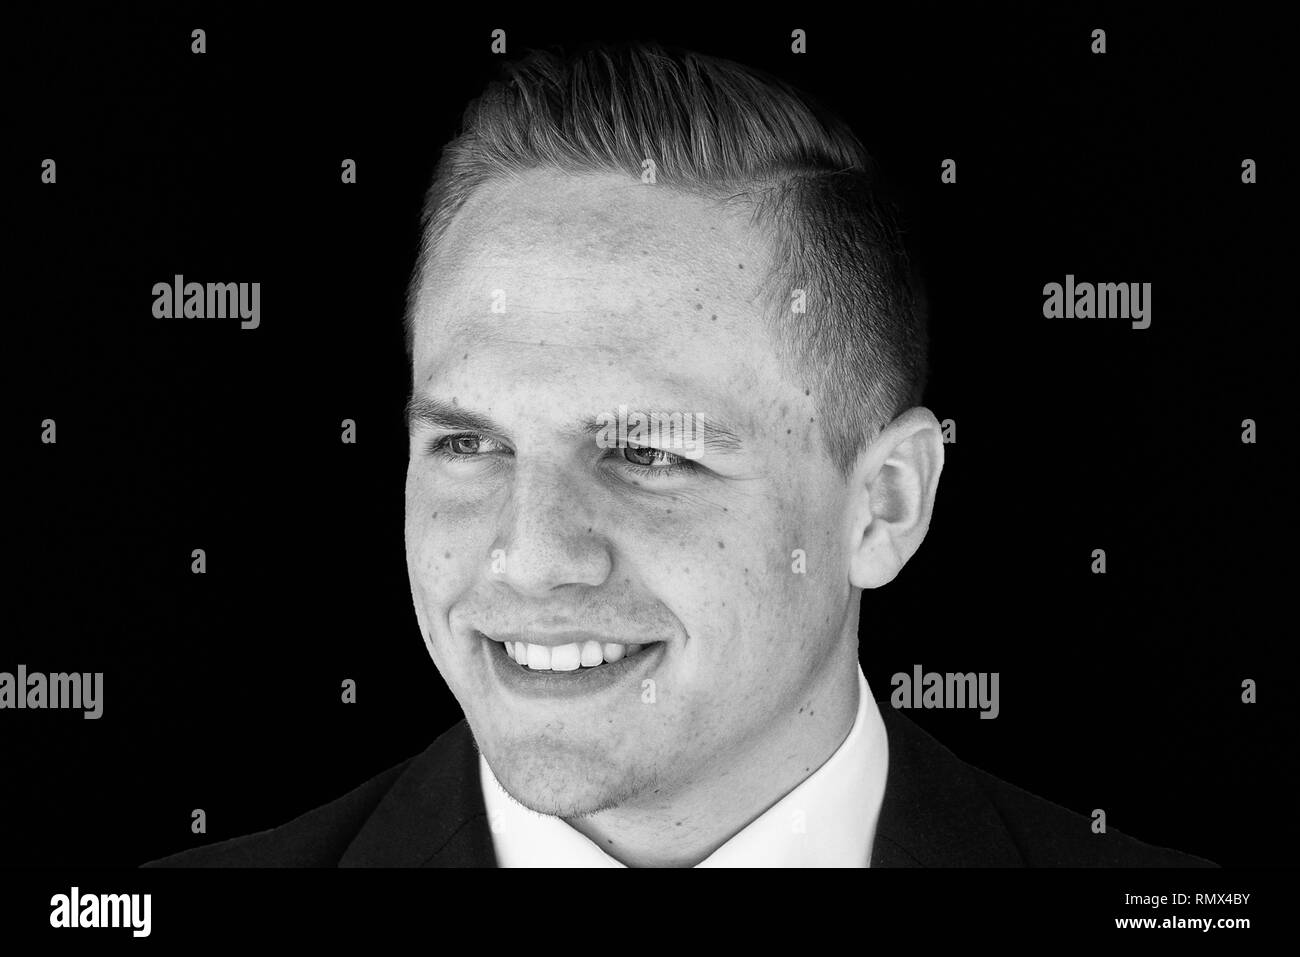 Smiling handsome young businessman in suit and tie looking off to the side with a quiet smile of satisfaction in black and white Stock Photo